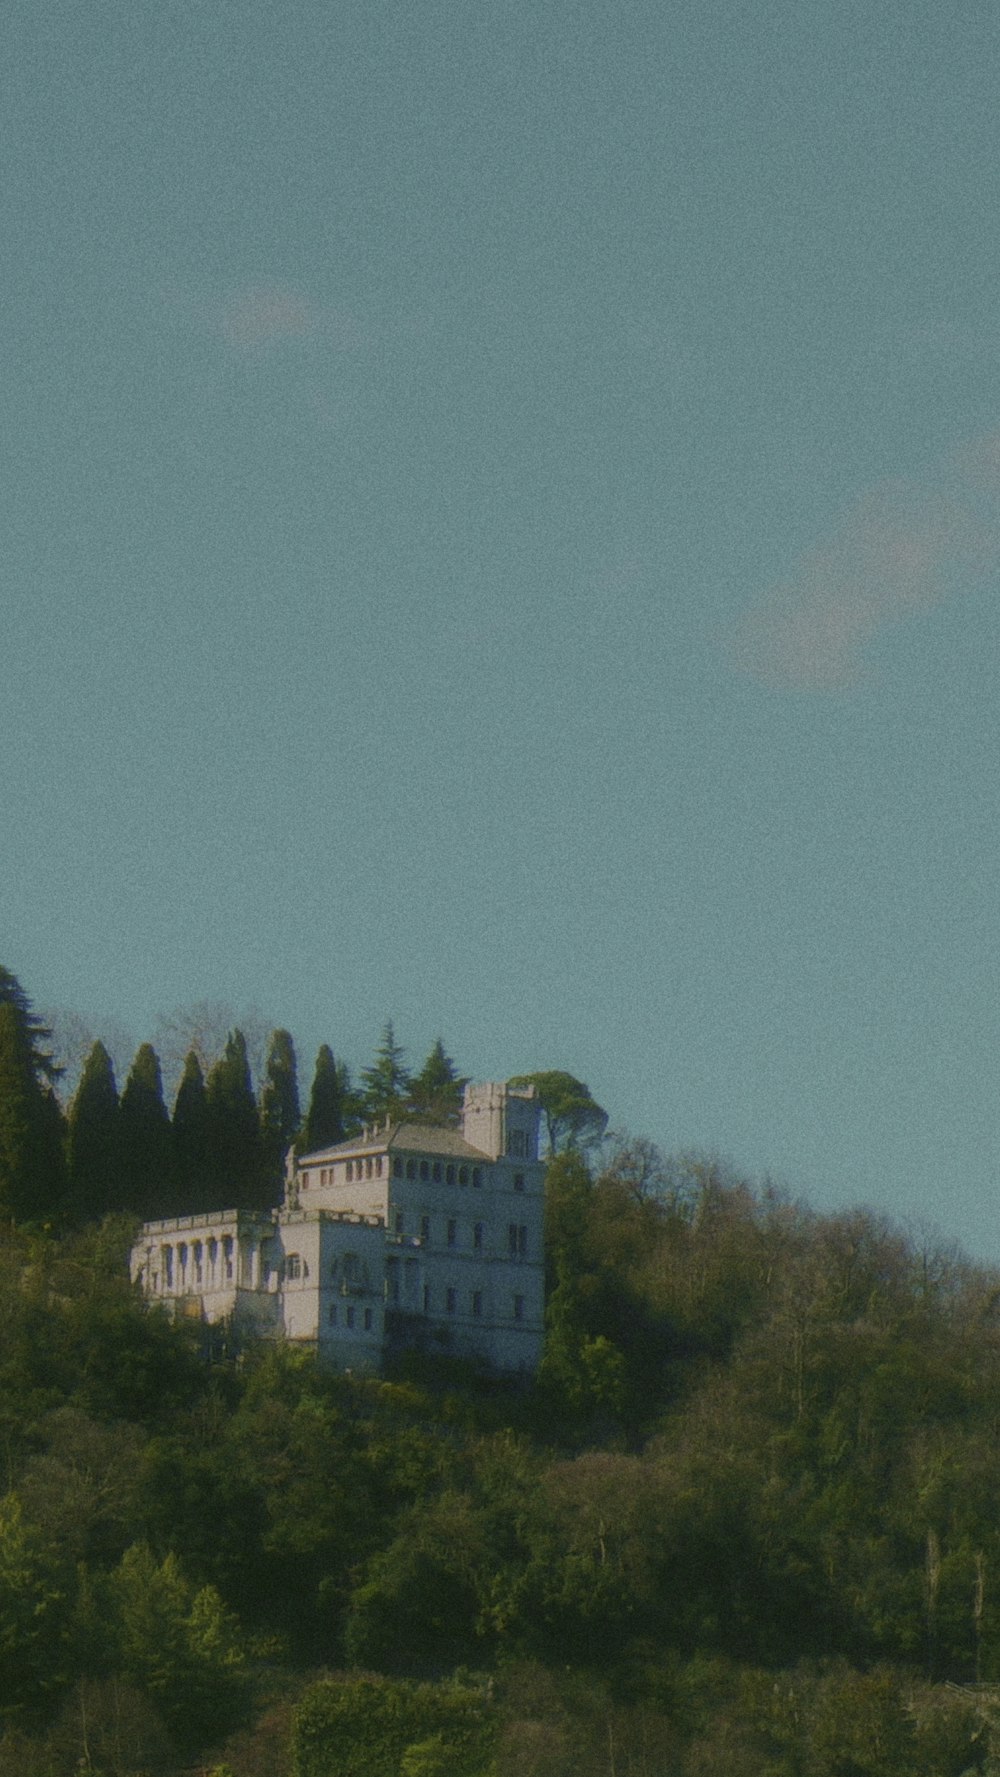 a large white house on a hill with trees